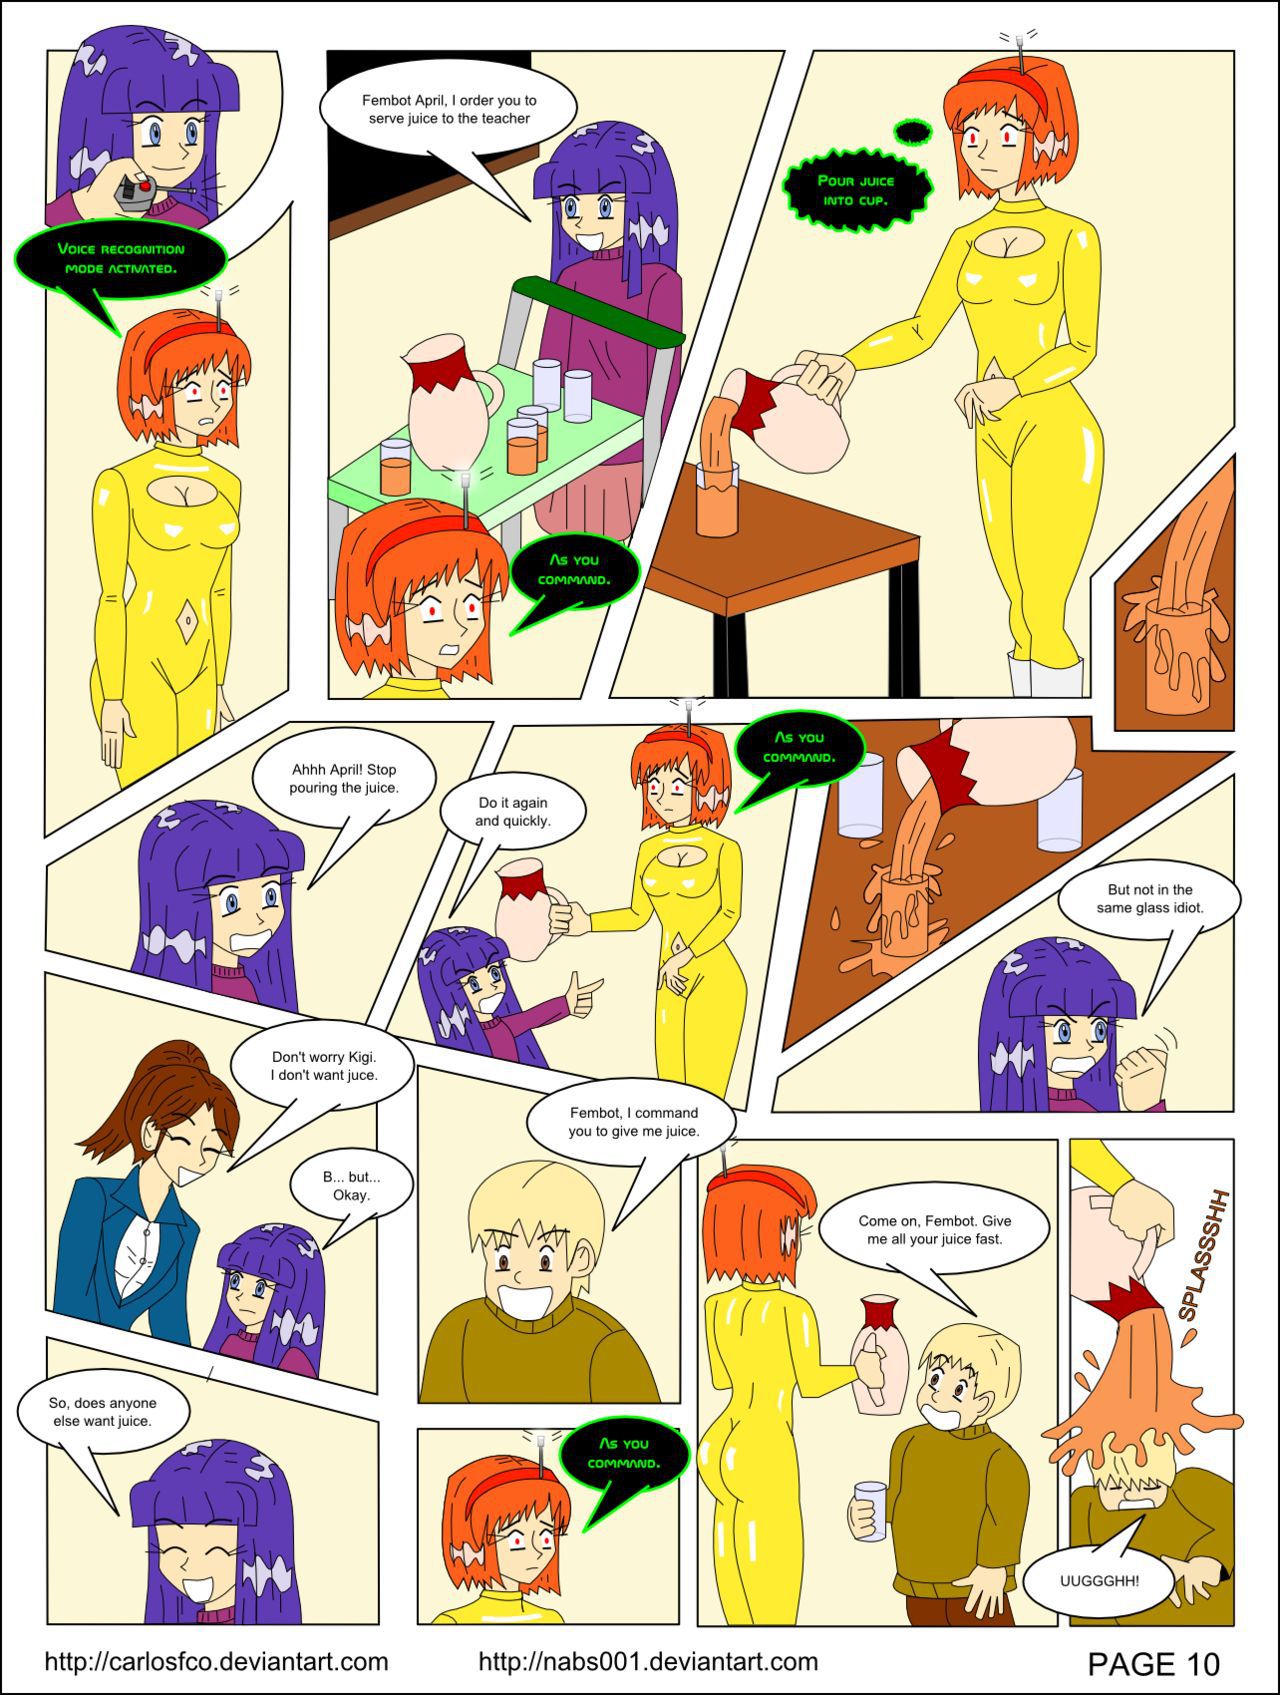 [Nabs001] Fembot April  1&2 (ongoing) 10